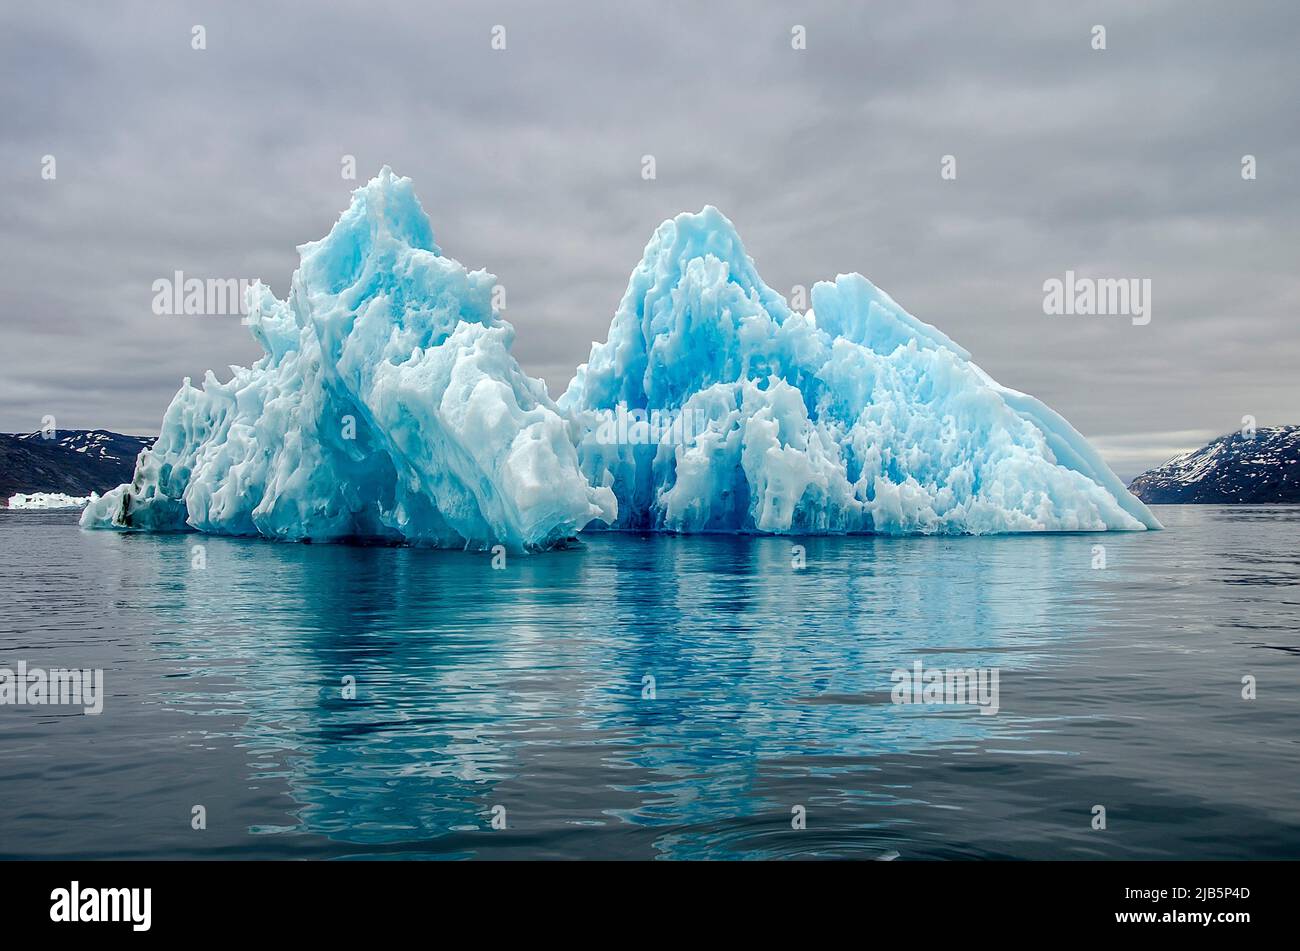 Bluish iceberg melting and forming curious shapes. Stock Photo